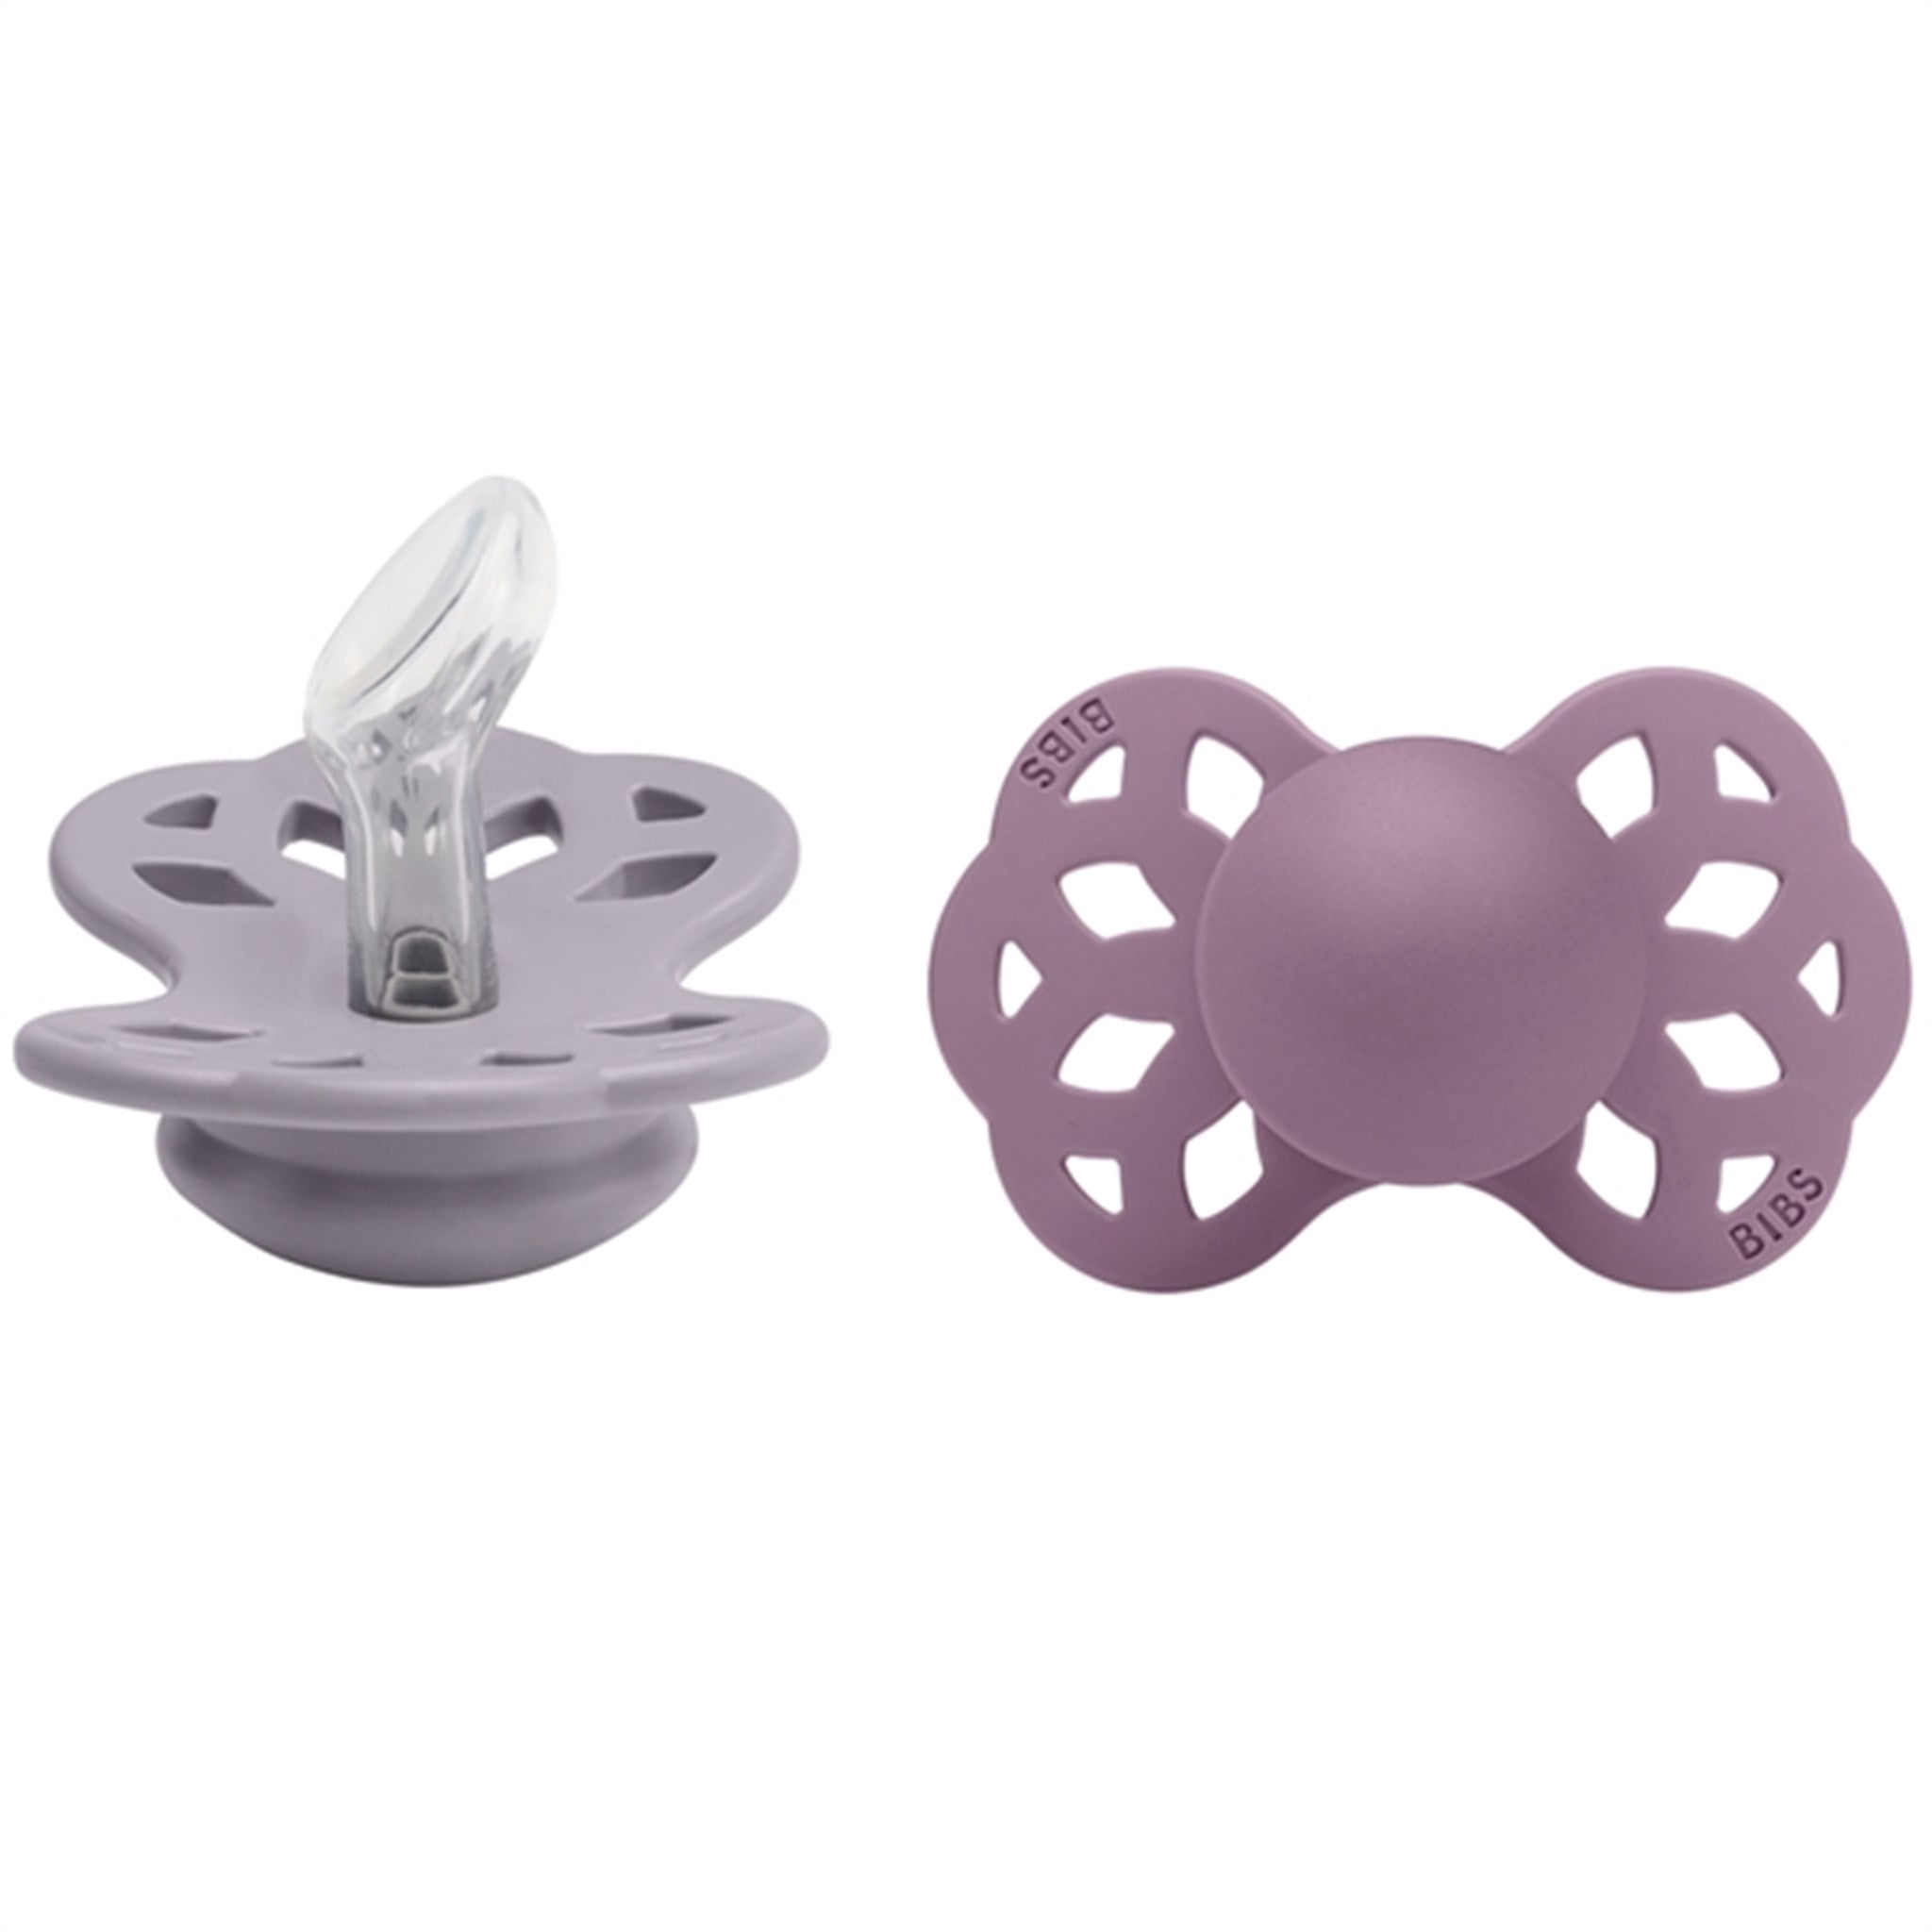 Bibs Infinity Silicone Pacifier 2-pack Fossil Grey/Mauve